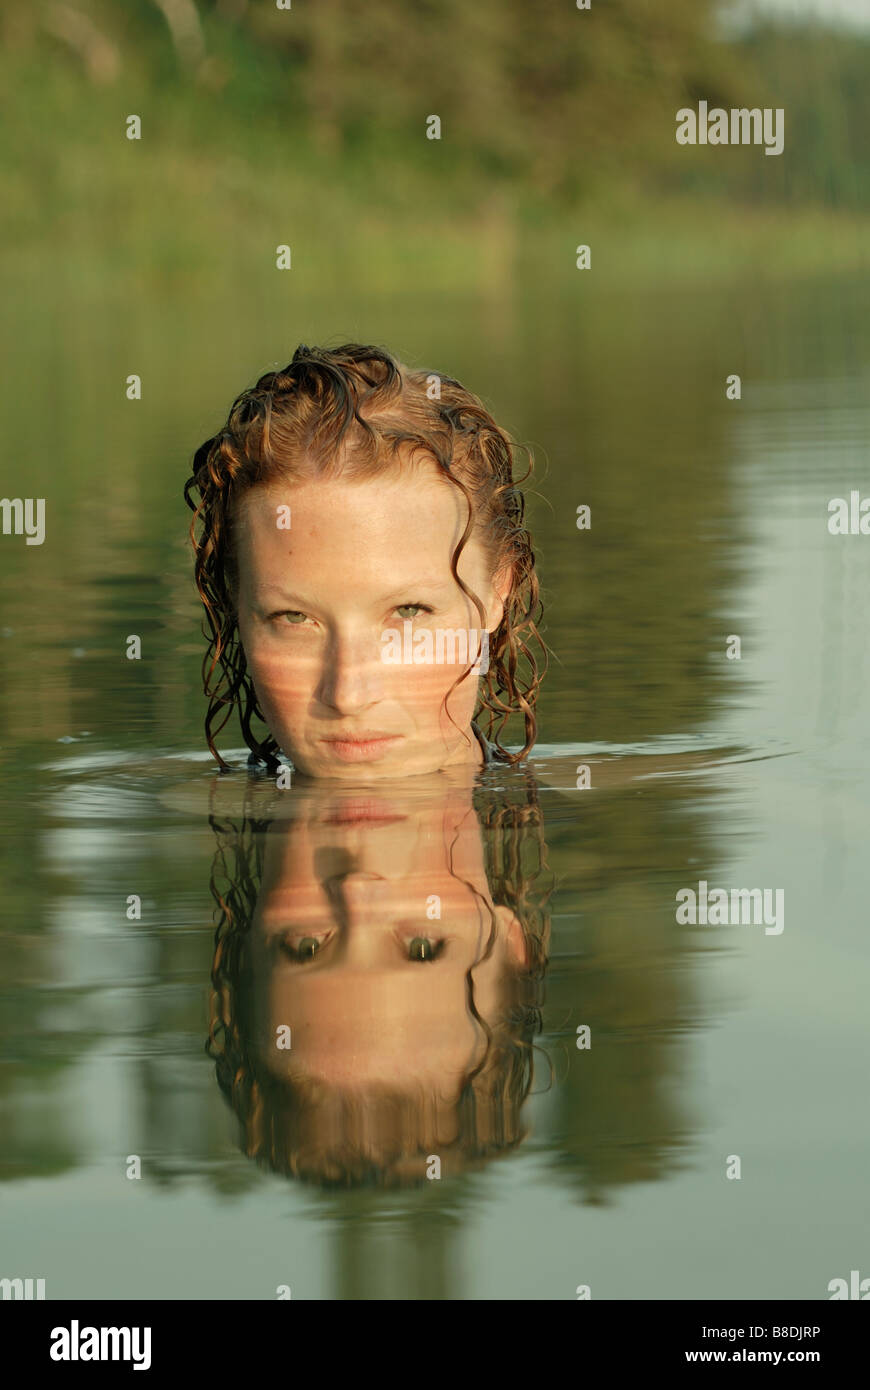 Woman in lake with face reflected in water, Lake Katherine, Riding Mountain National Park, Manitoba, Canada Stock Photo